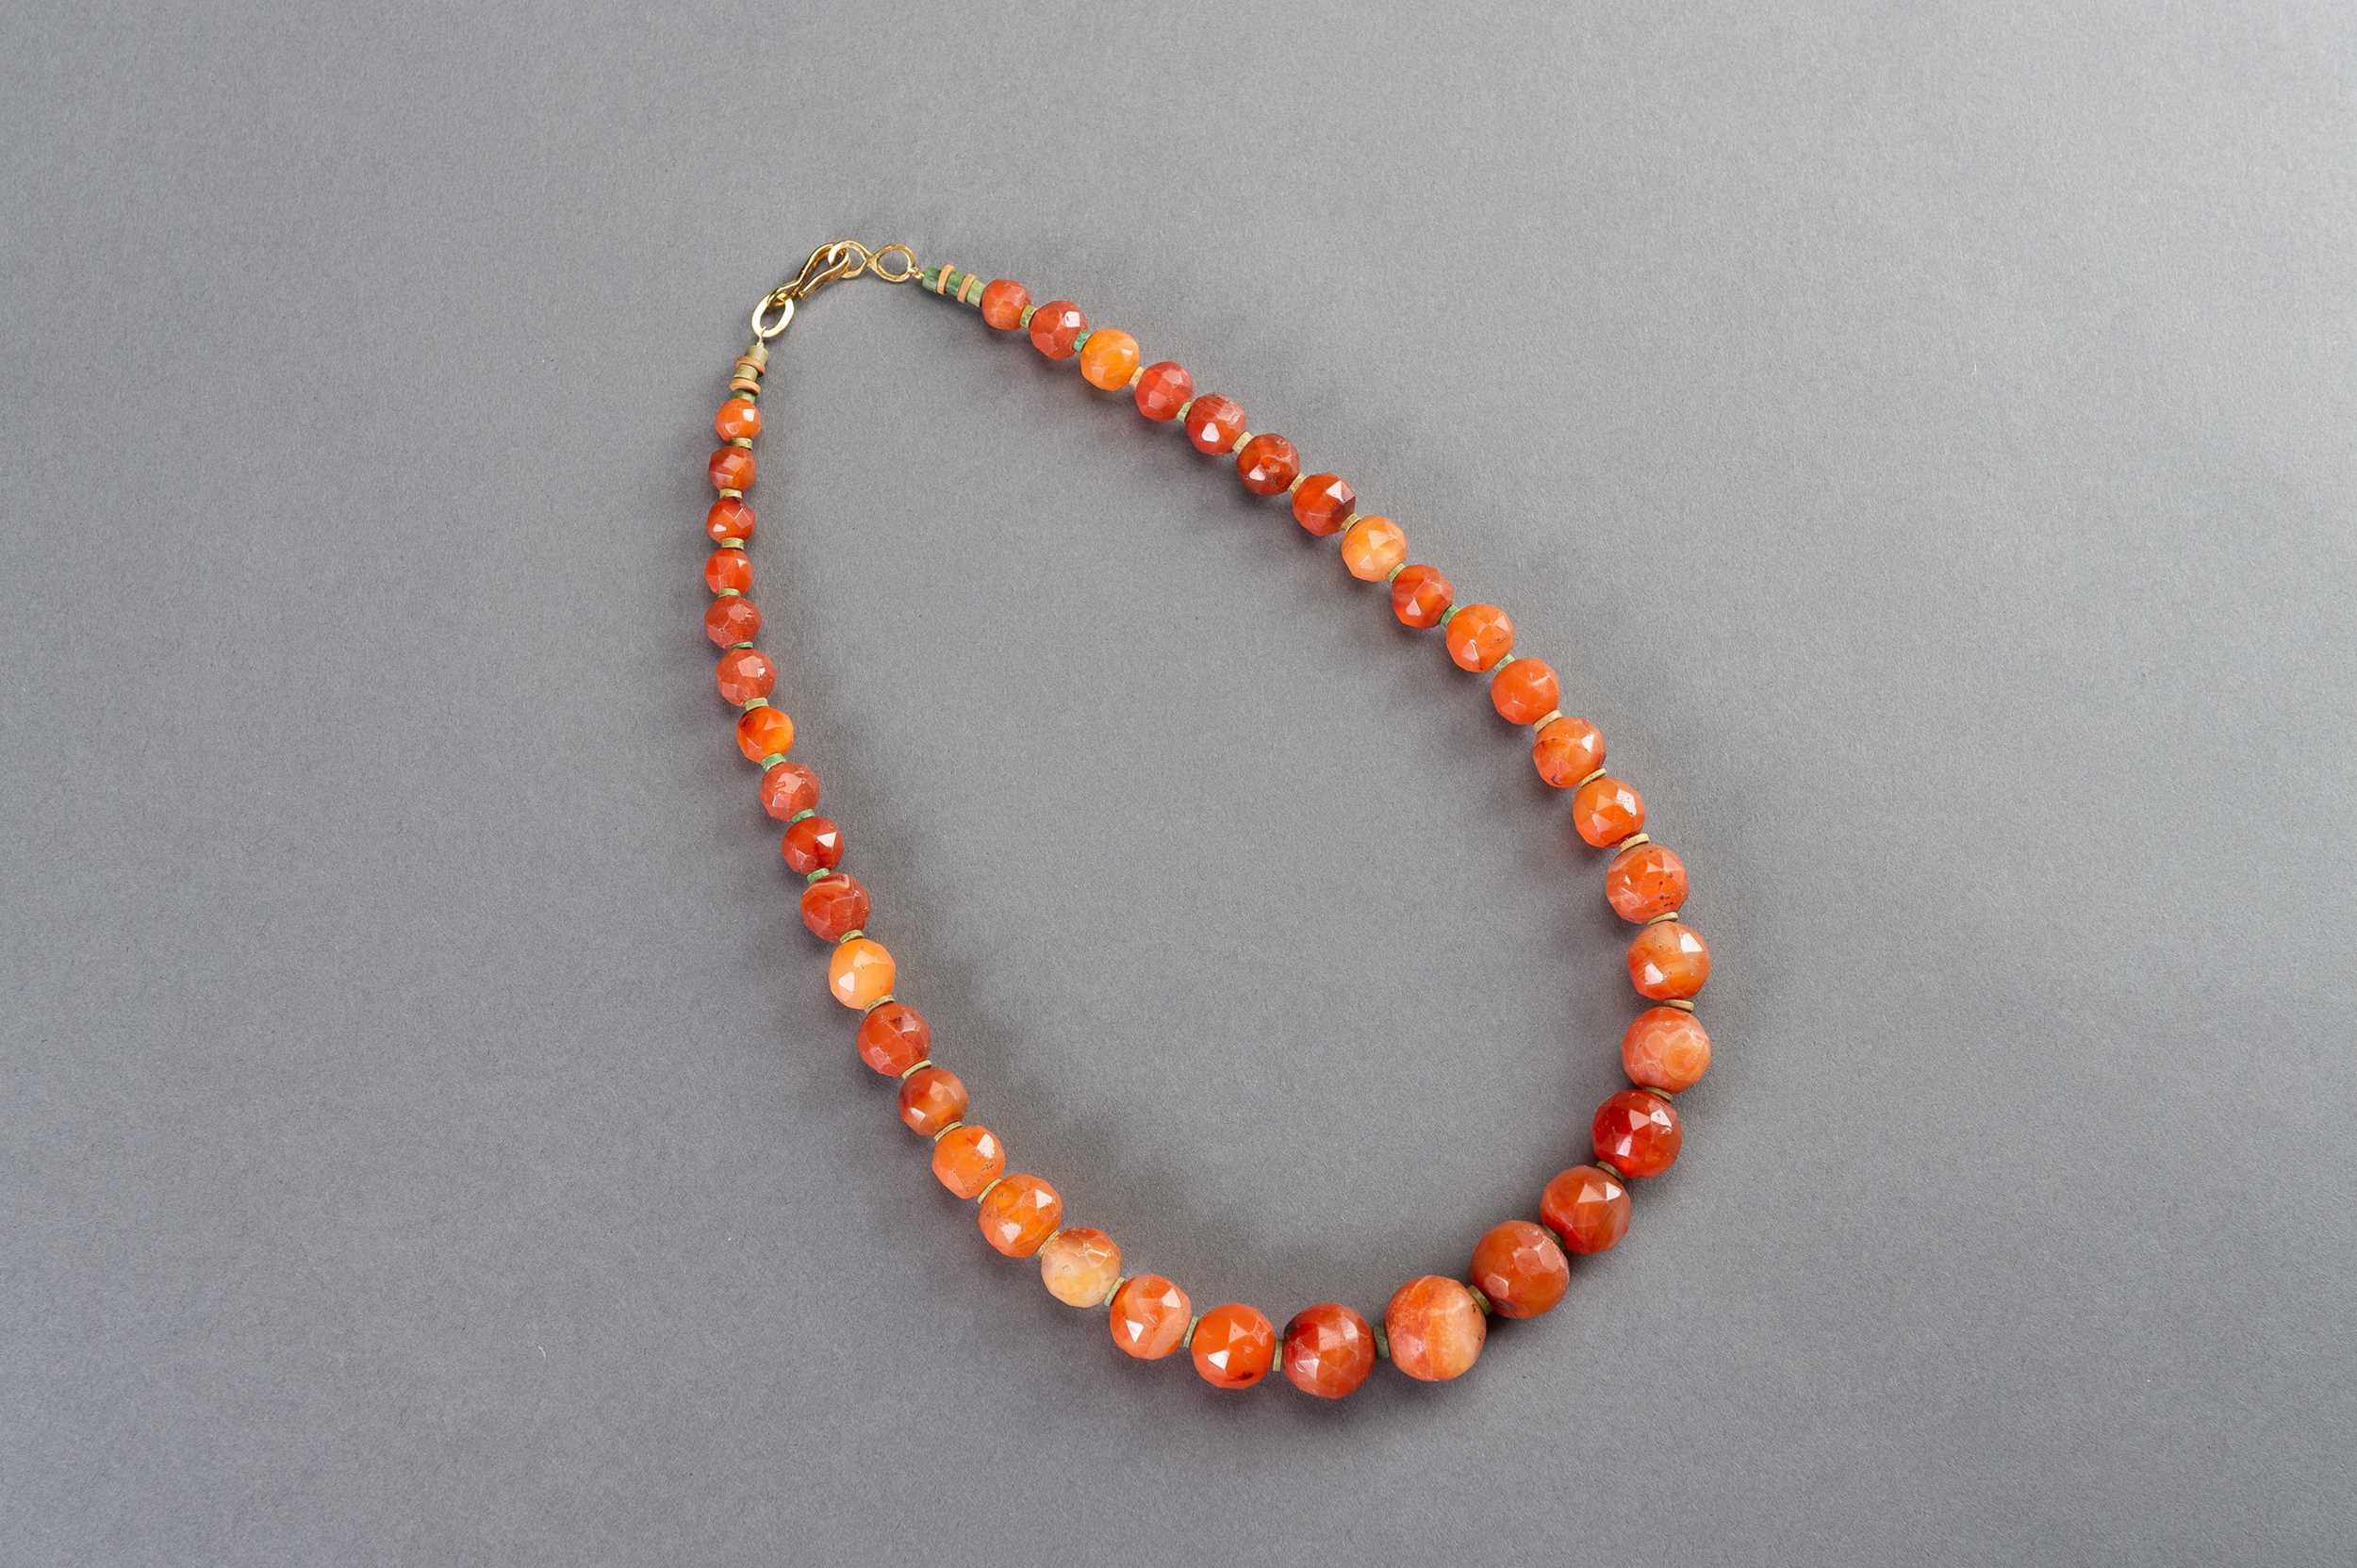 Lot 594 - A FINE NECKLACE WITH EGYPTIAN CARNELIAN BEADS GIFTED TO SHEIKH ALI ABDEL RASSOUL